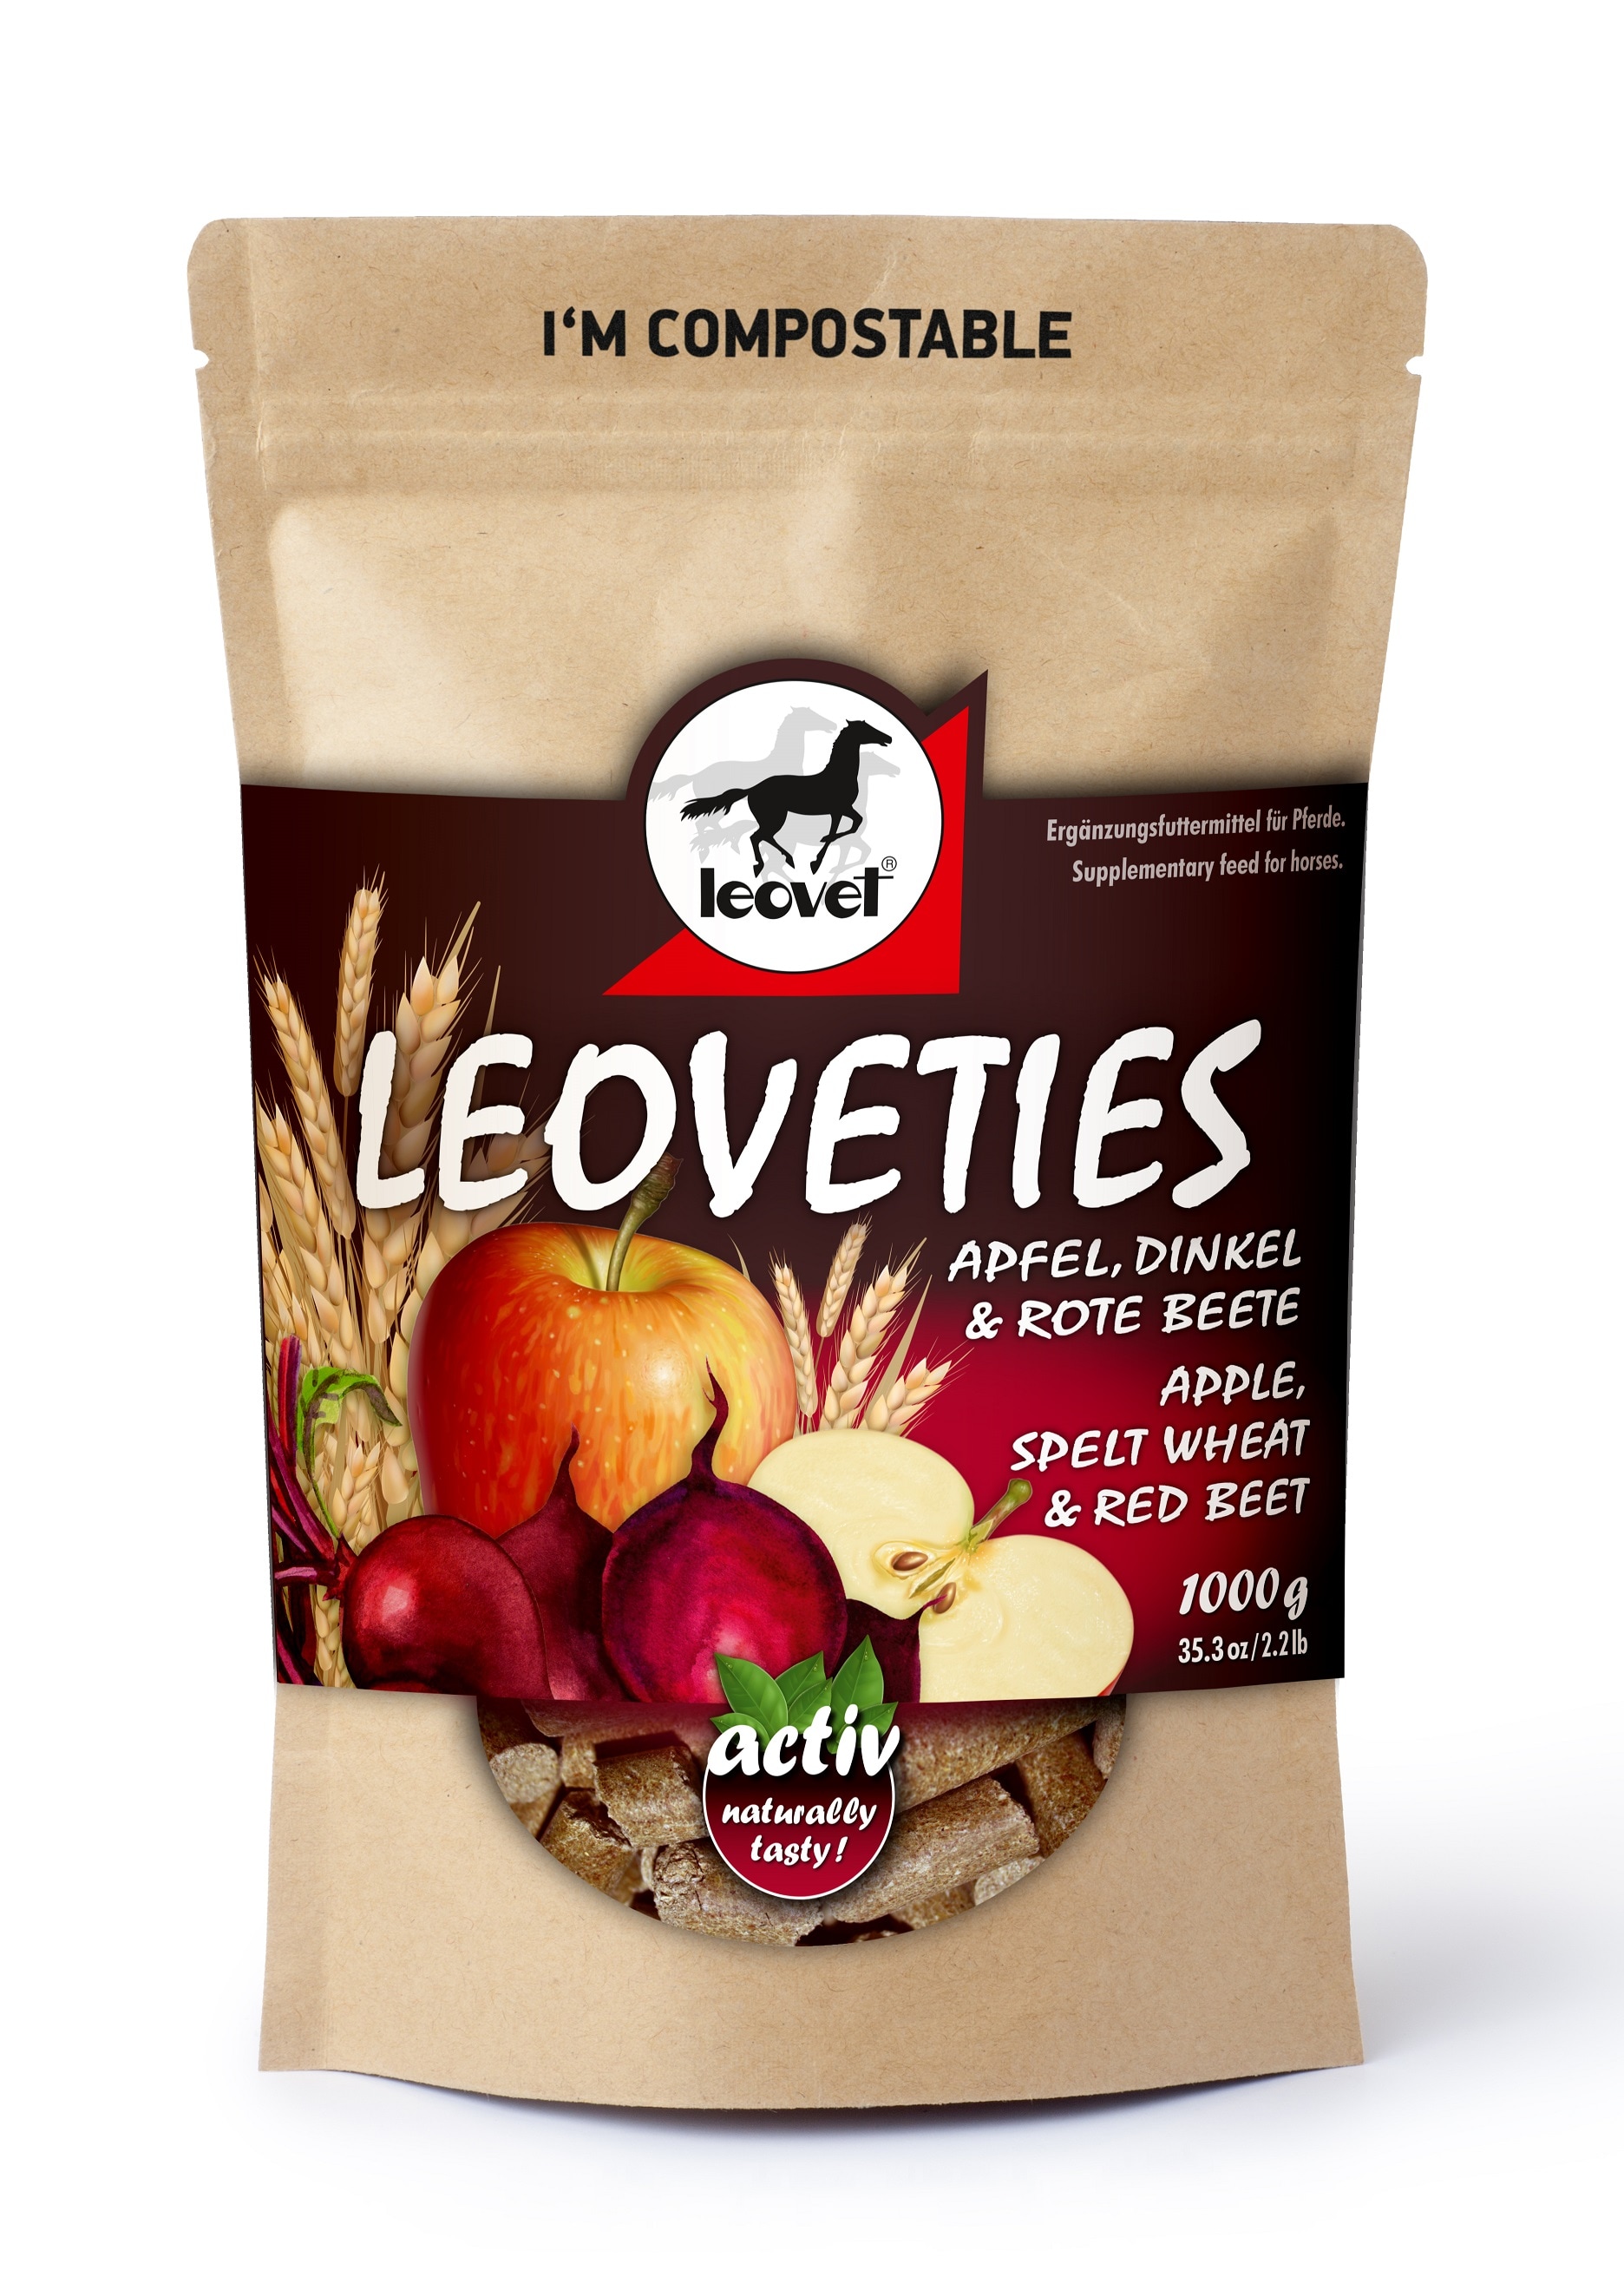 leoveties-apple-speal-wheat-red-beets